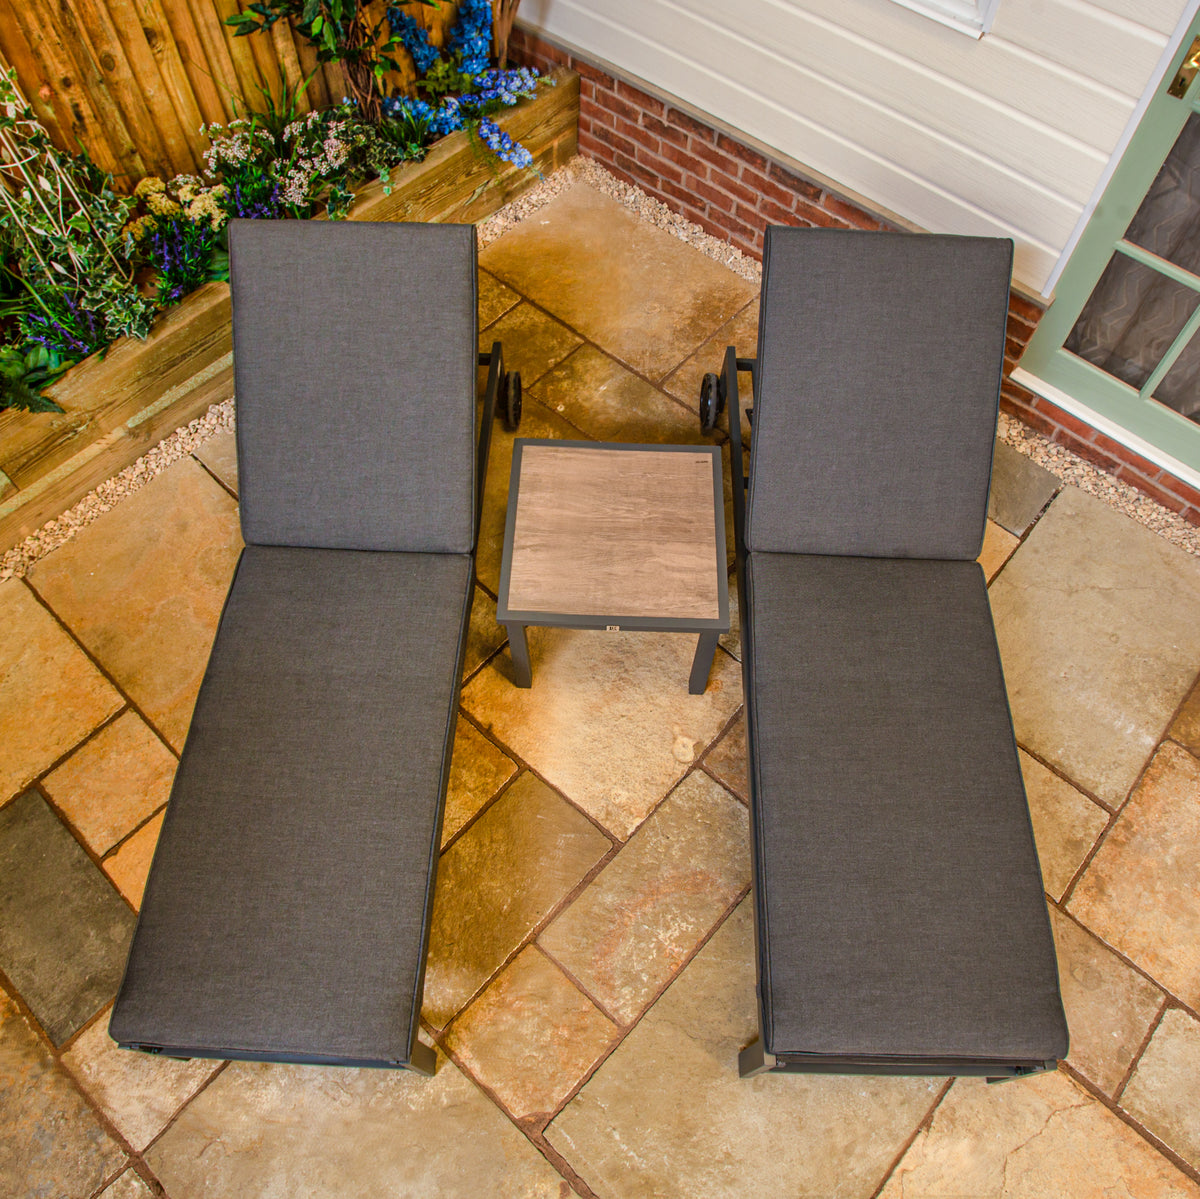 LG Outdoor Monza Set of 2 Aluminium Sunloungers and Side Table